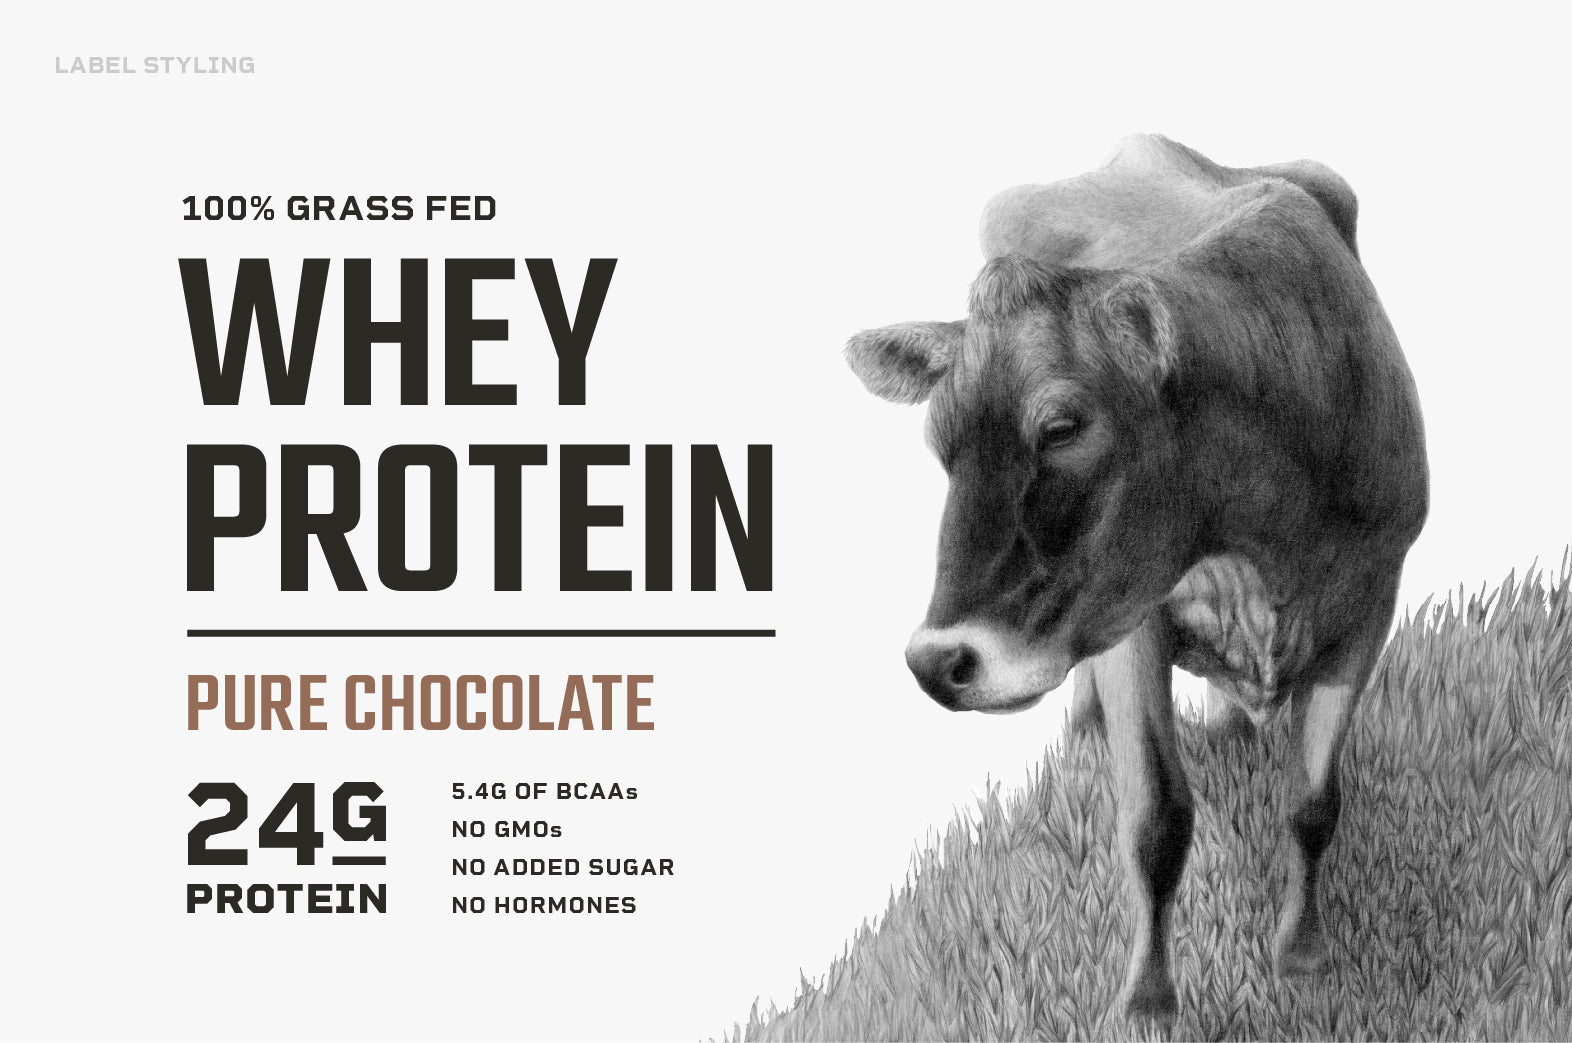 Levels new grass-fed whey protein labels